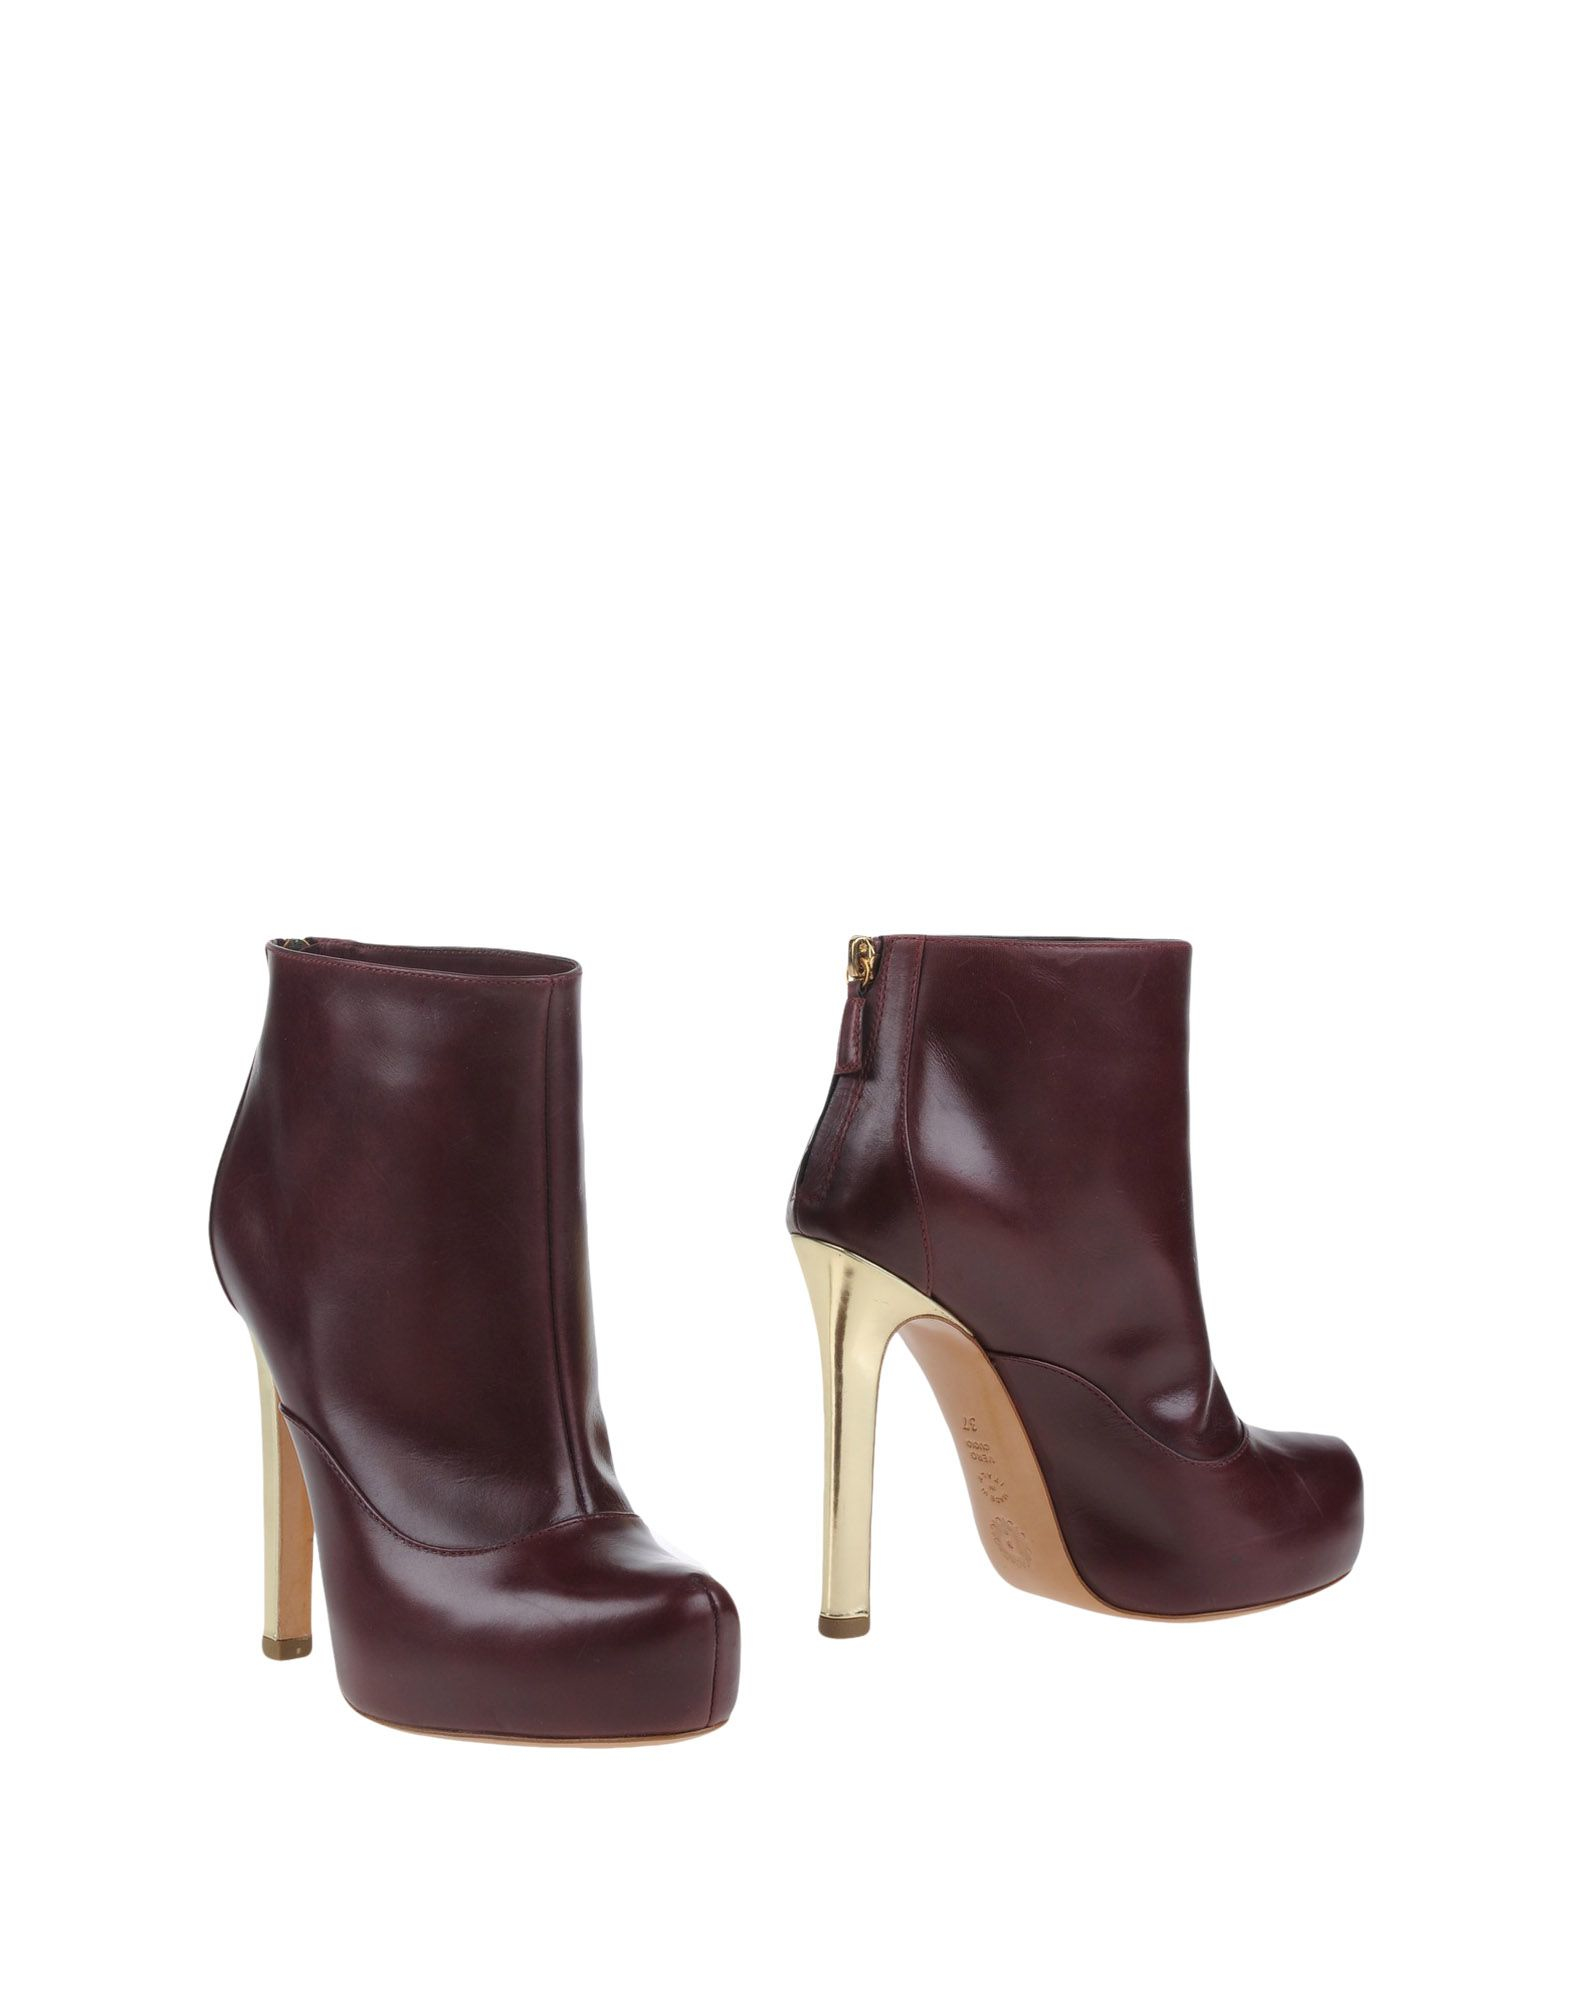 Lyst - Pollini Ankle Boots in Brown